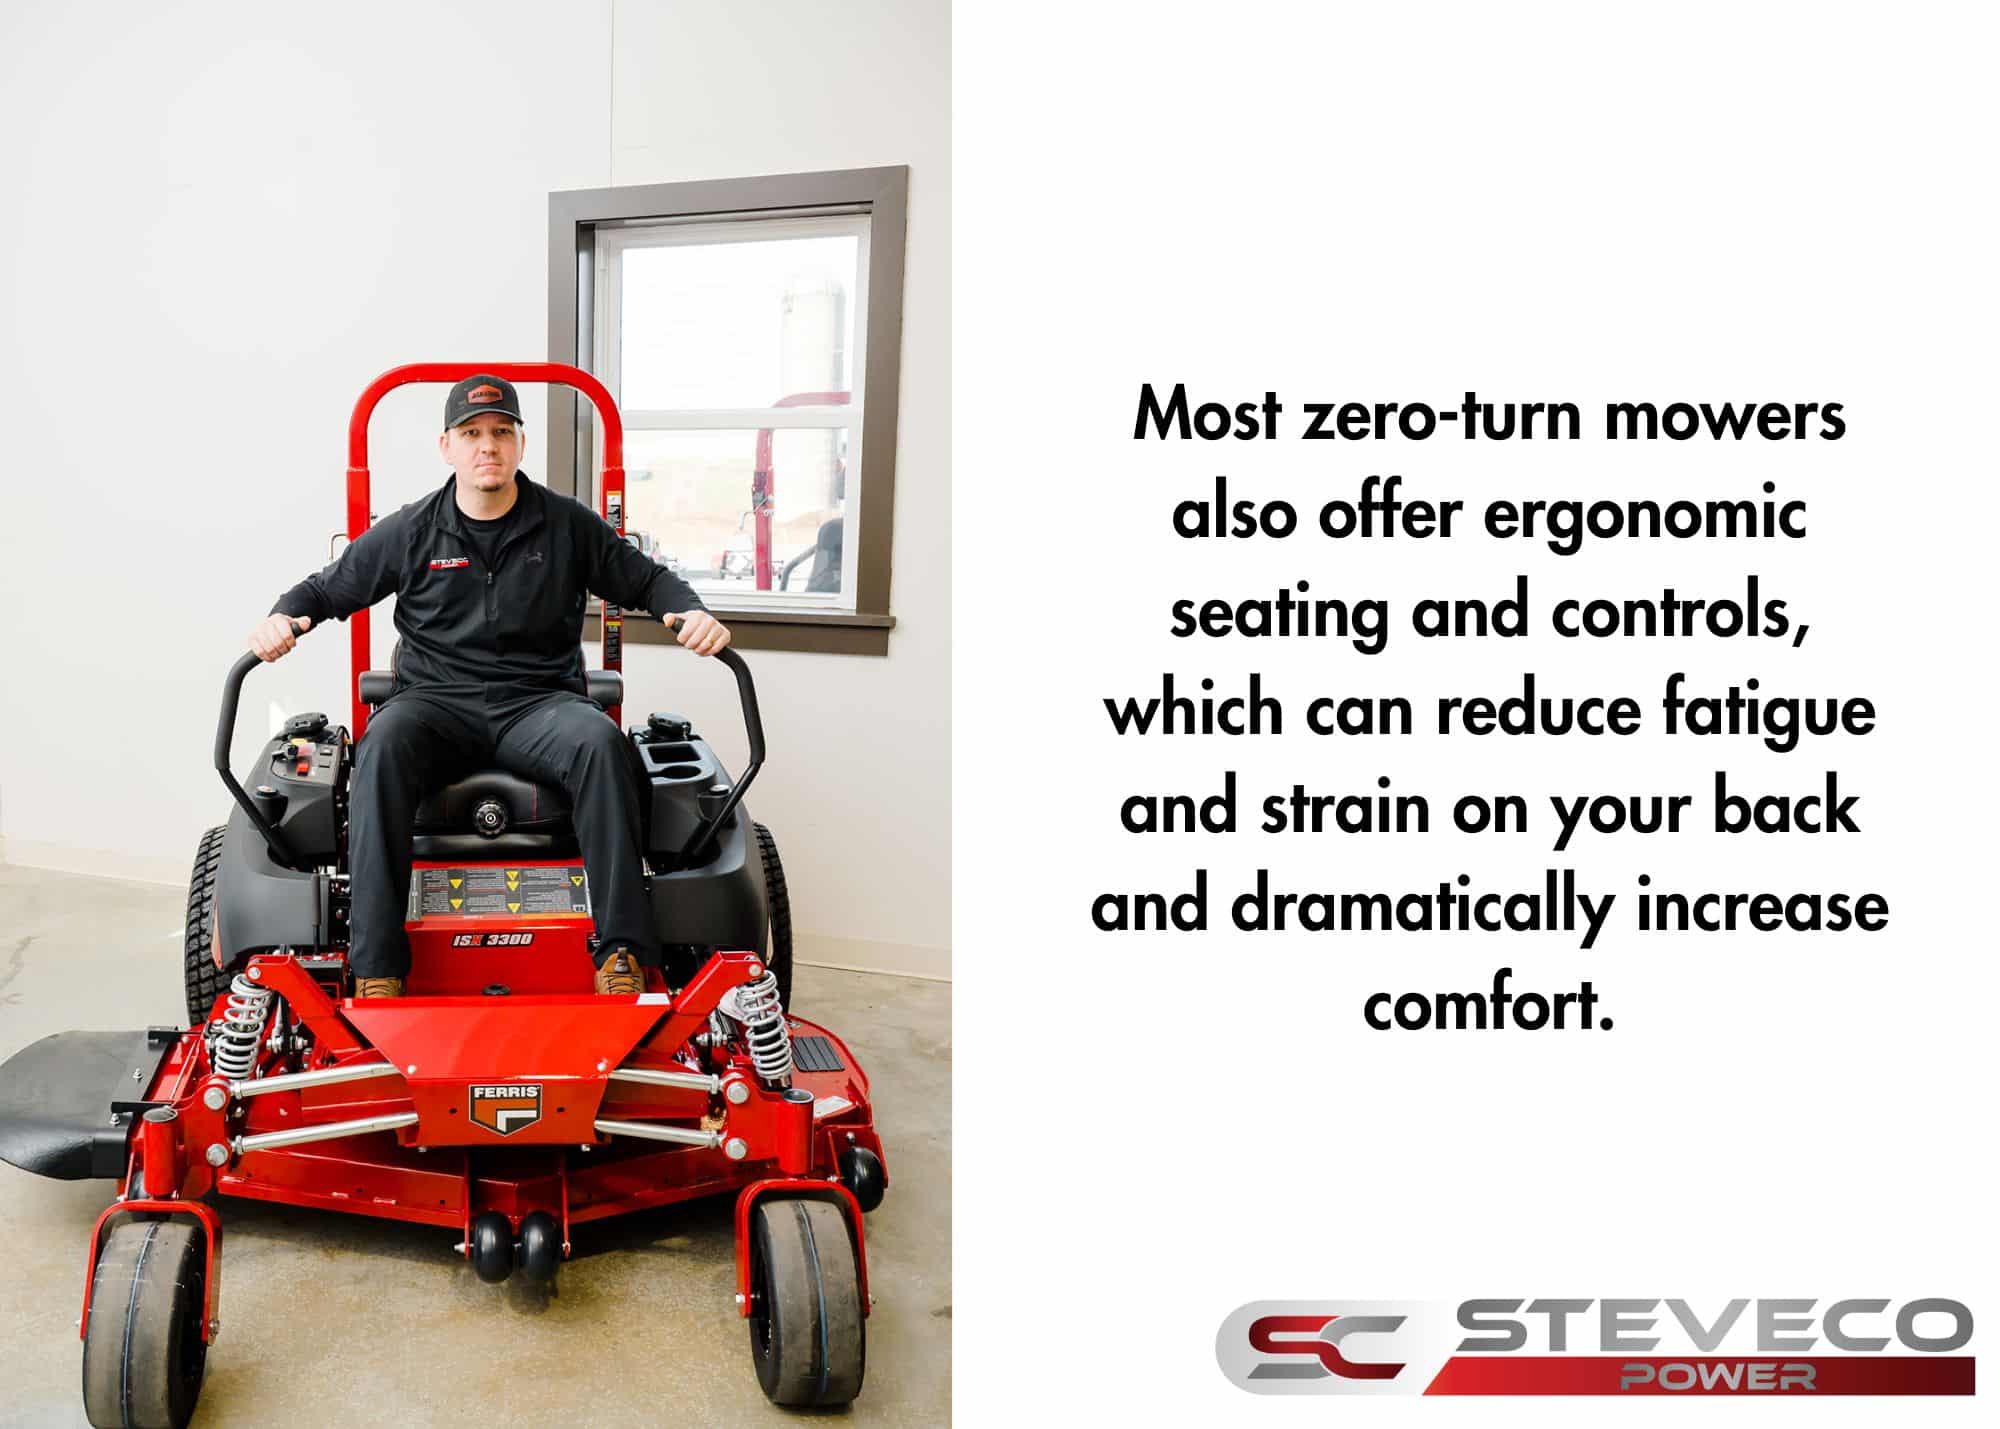 zero-turn mowers also offer ergonomic seating and controls